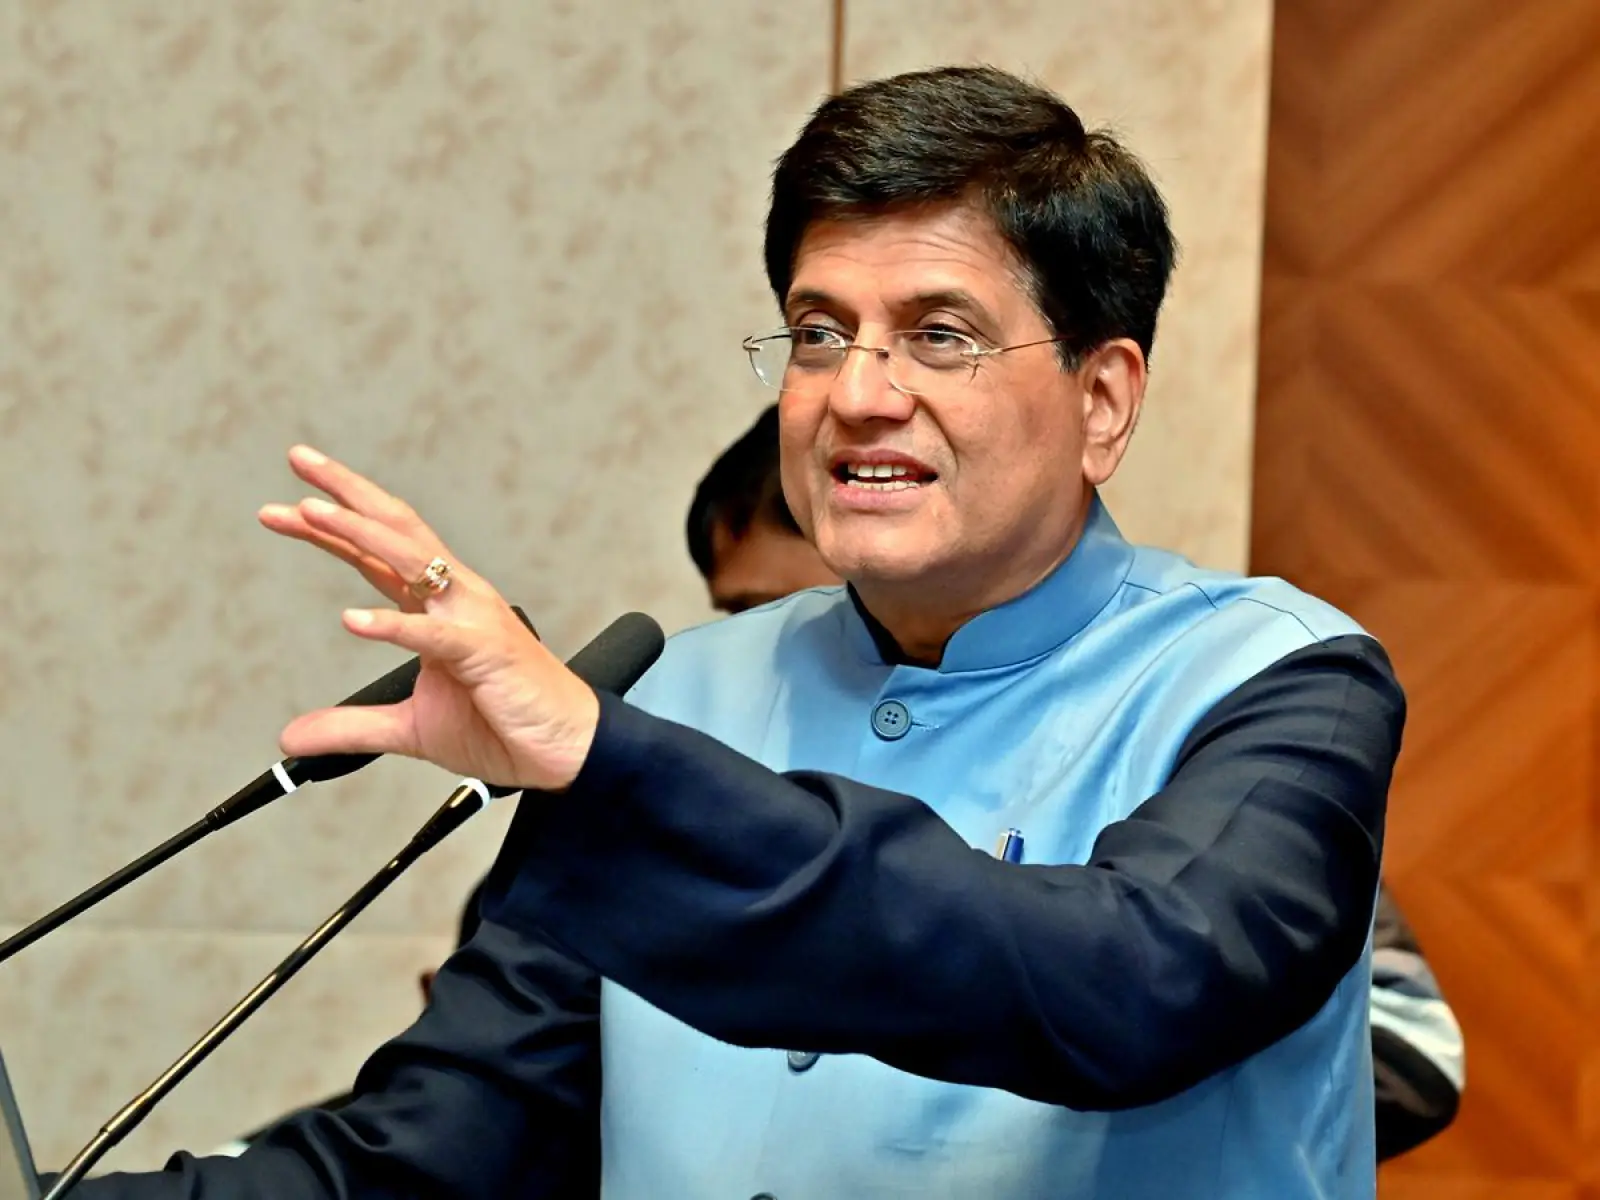 India's entire policy remains intact for the benefit of farmers and fishermen in WTO, said Piyush Goyal